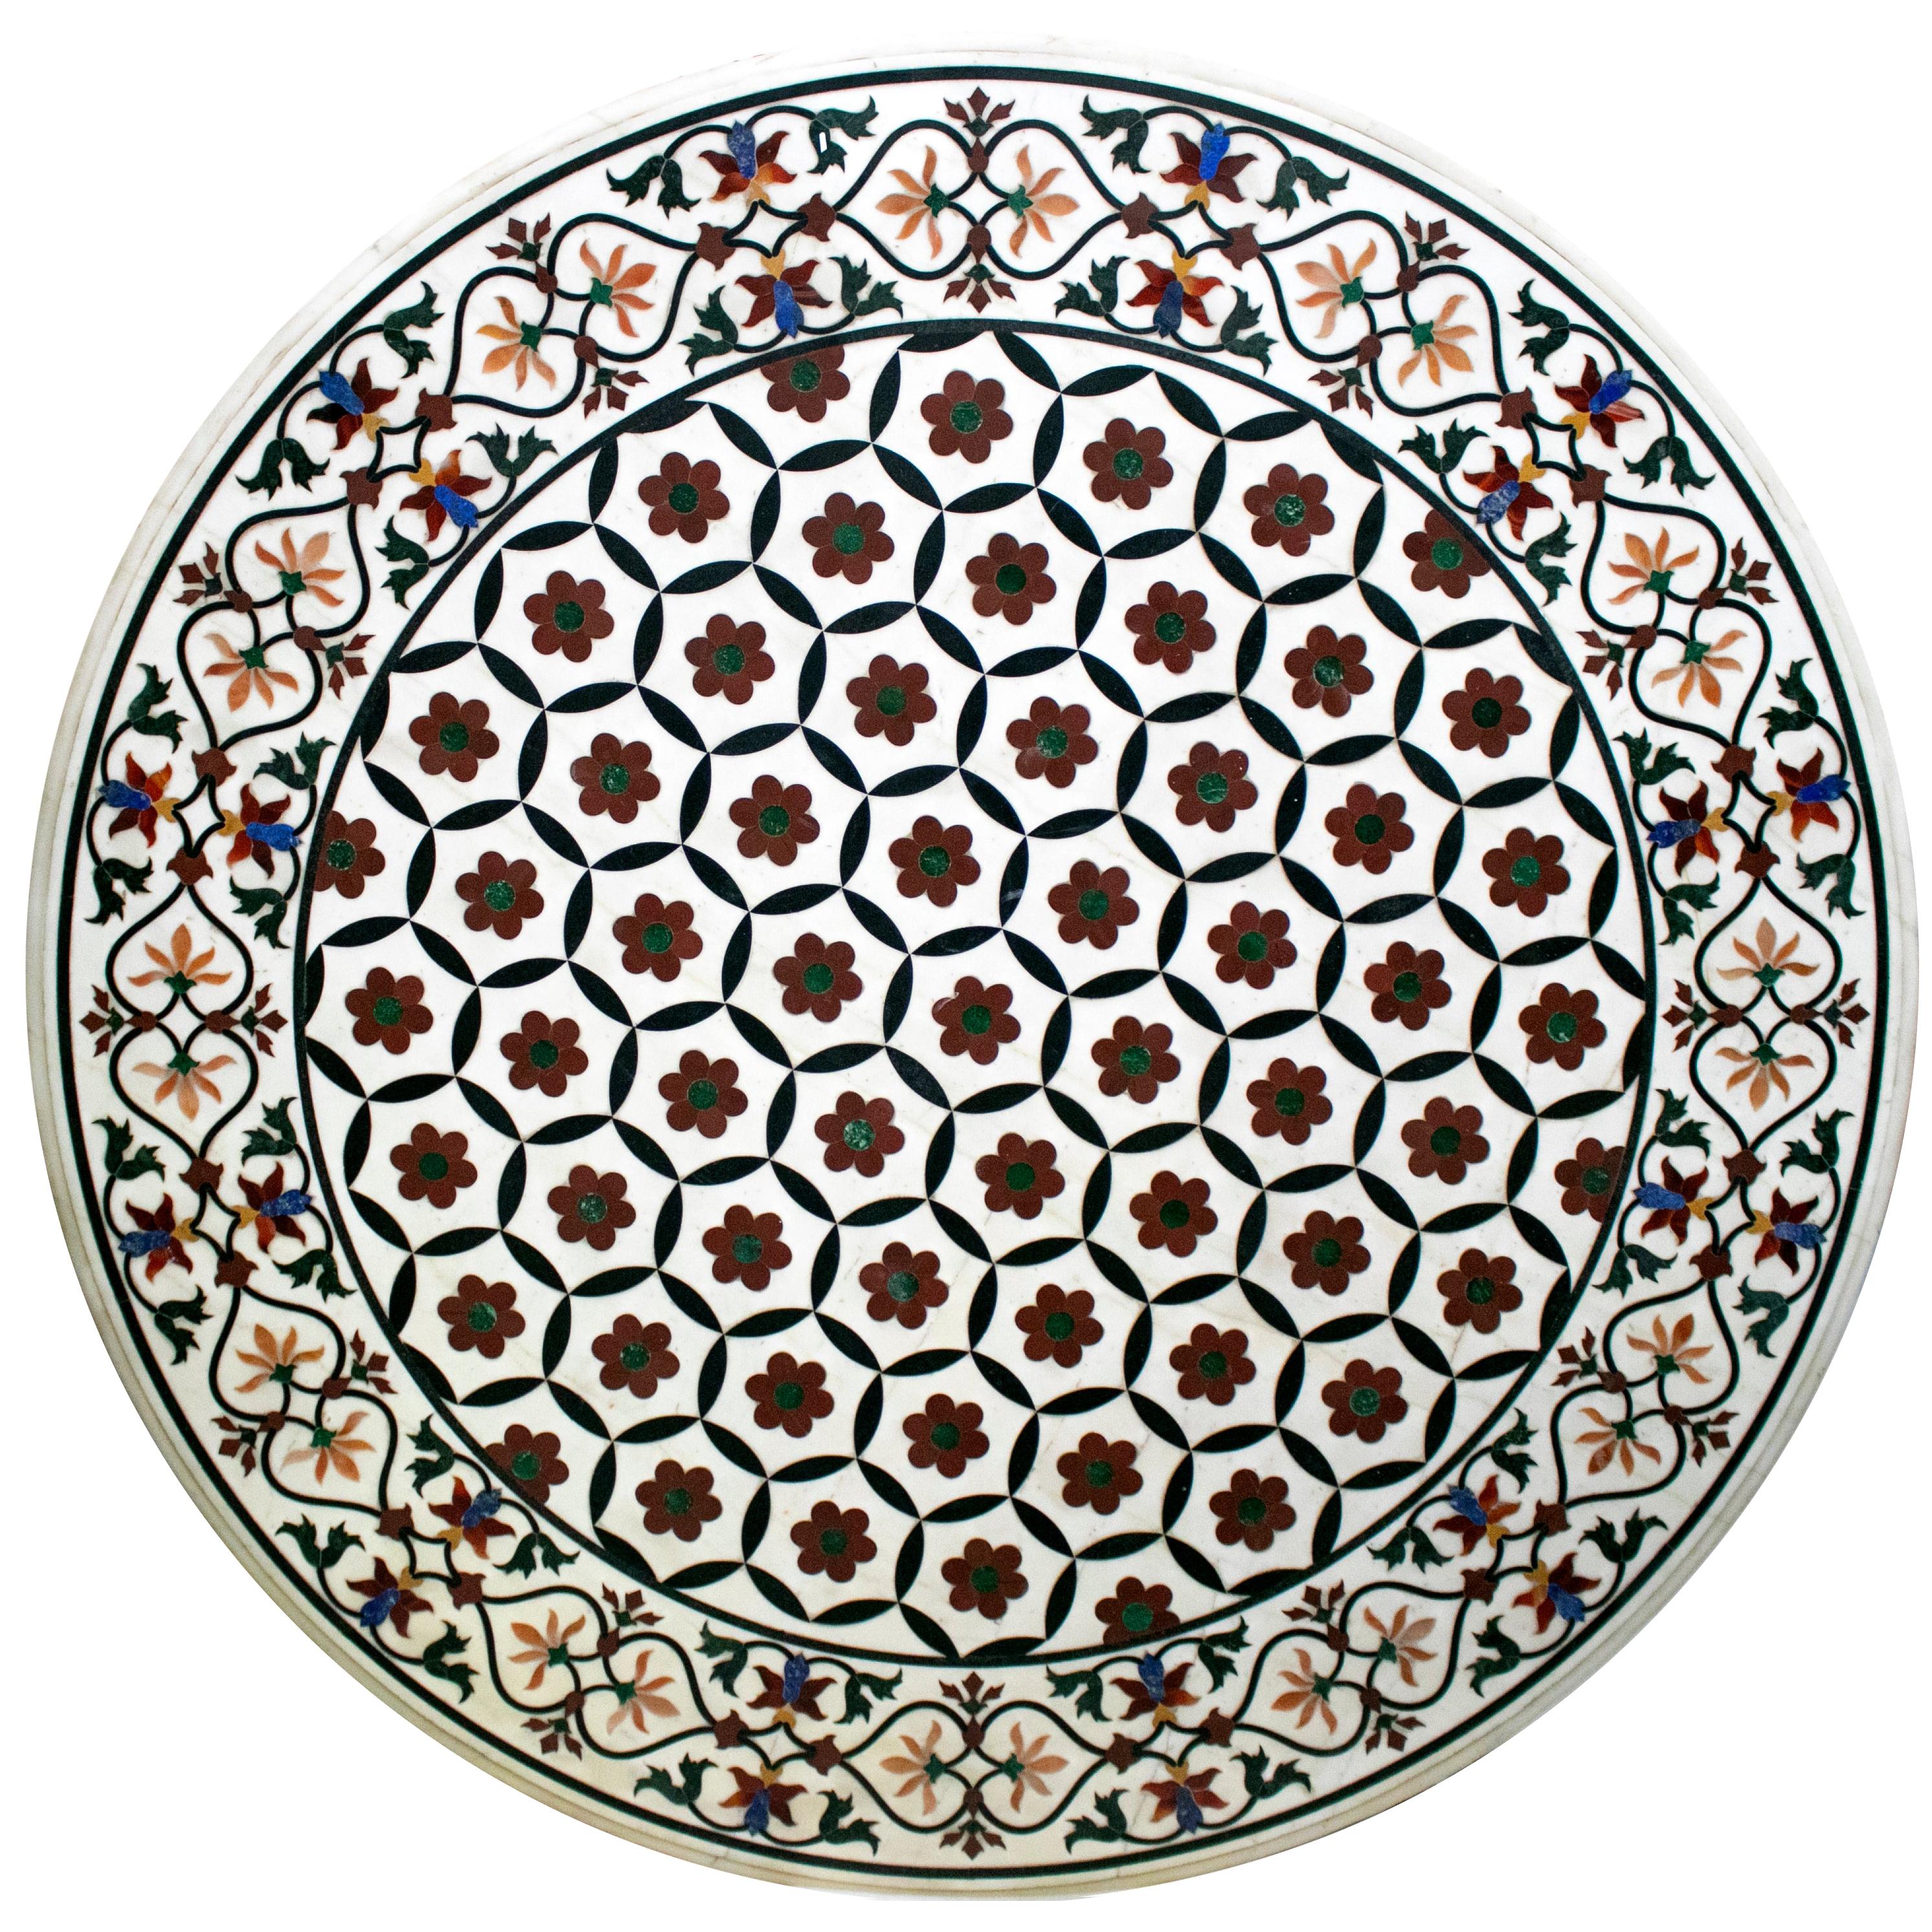 Round Pietre Dure Geometric White Marble Mosaic Table Top with Inlays For Sale